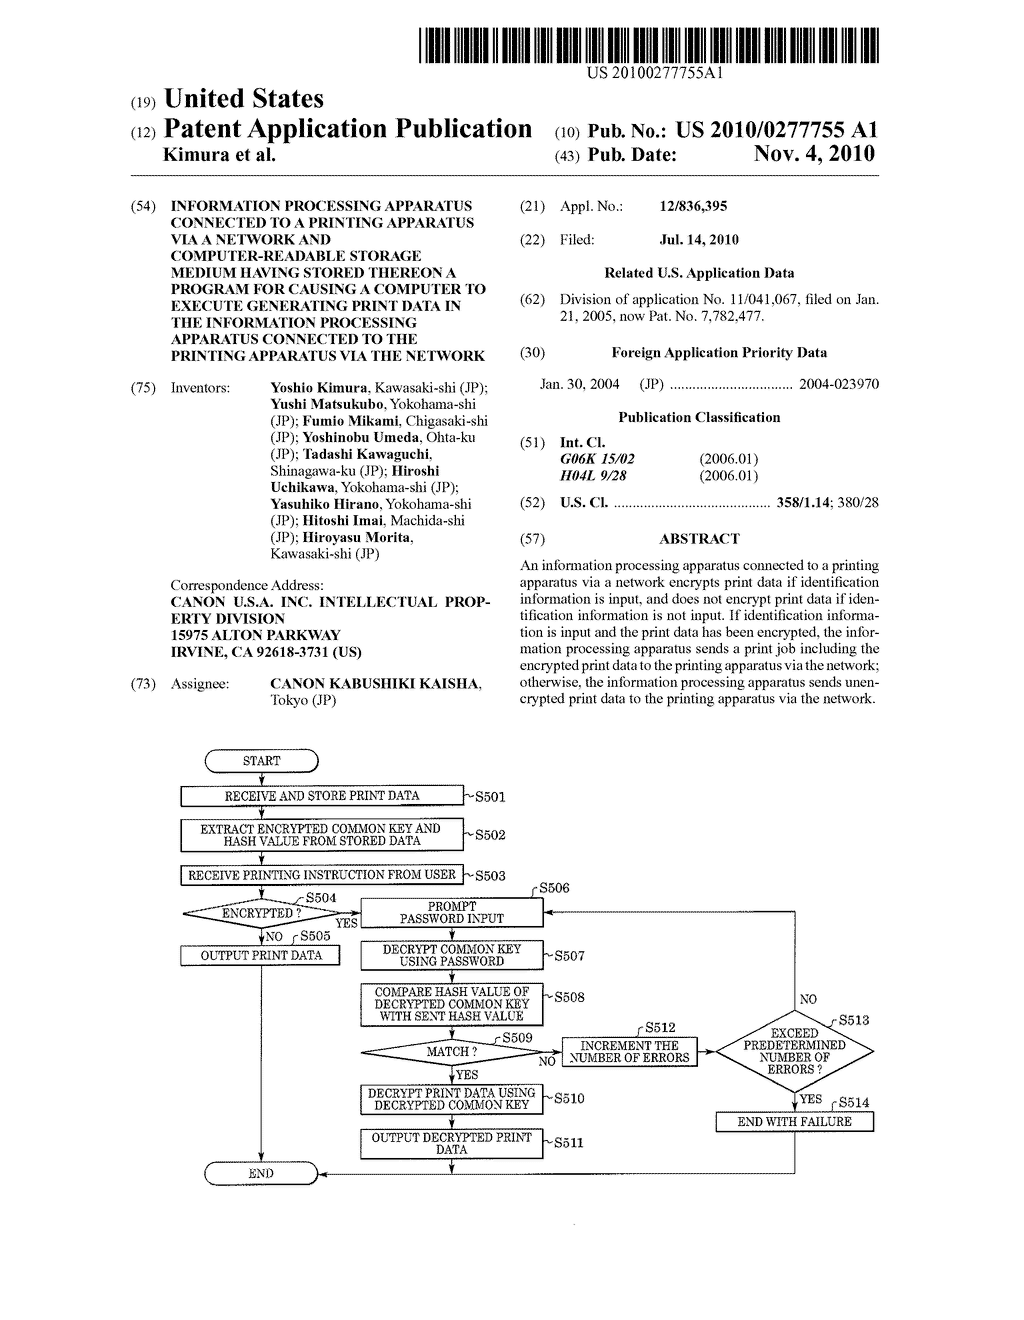 INFORMATION PROCESSING APPARATUS CONNECTED TO A PRINTING APPARATUS VIA A NETWORK AND COMPUTER-READABLE STORAGE MEDIUM HAVING STORED THEREON A PROGRAM FOR CAUSING A COMPUTER TO EXECUTE GENERATING PRINT DATA IN THE INFORMATION PROCESSING APPARATUS CONNECTED TO THE PRINTING APPARATUS VIA THE NETWORK - diagram, schematic, and image 01